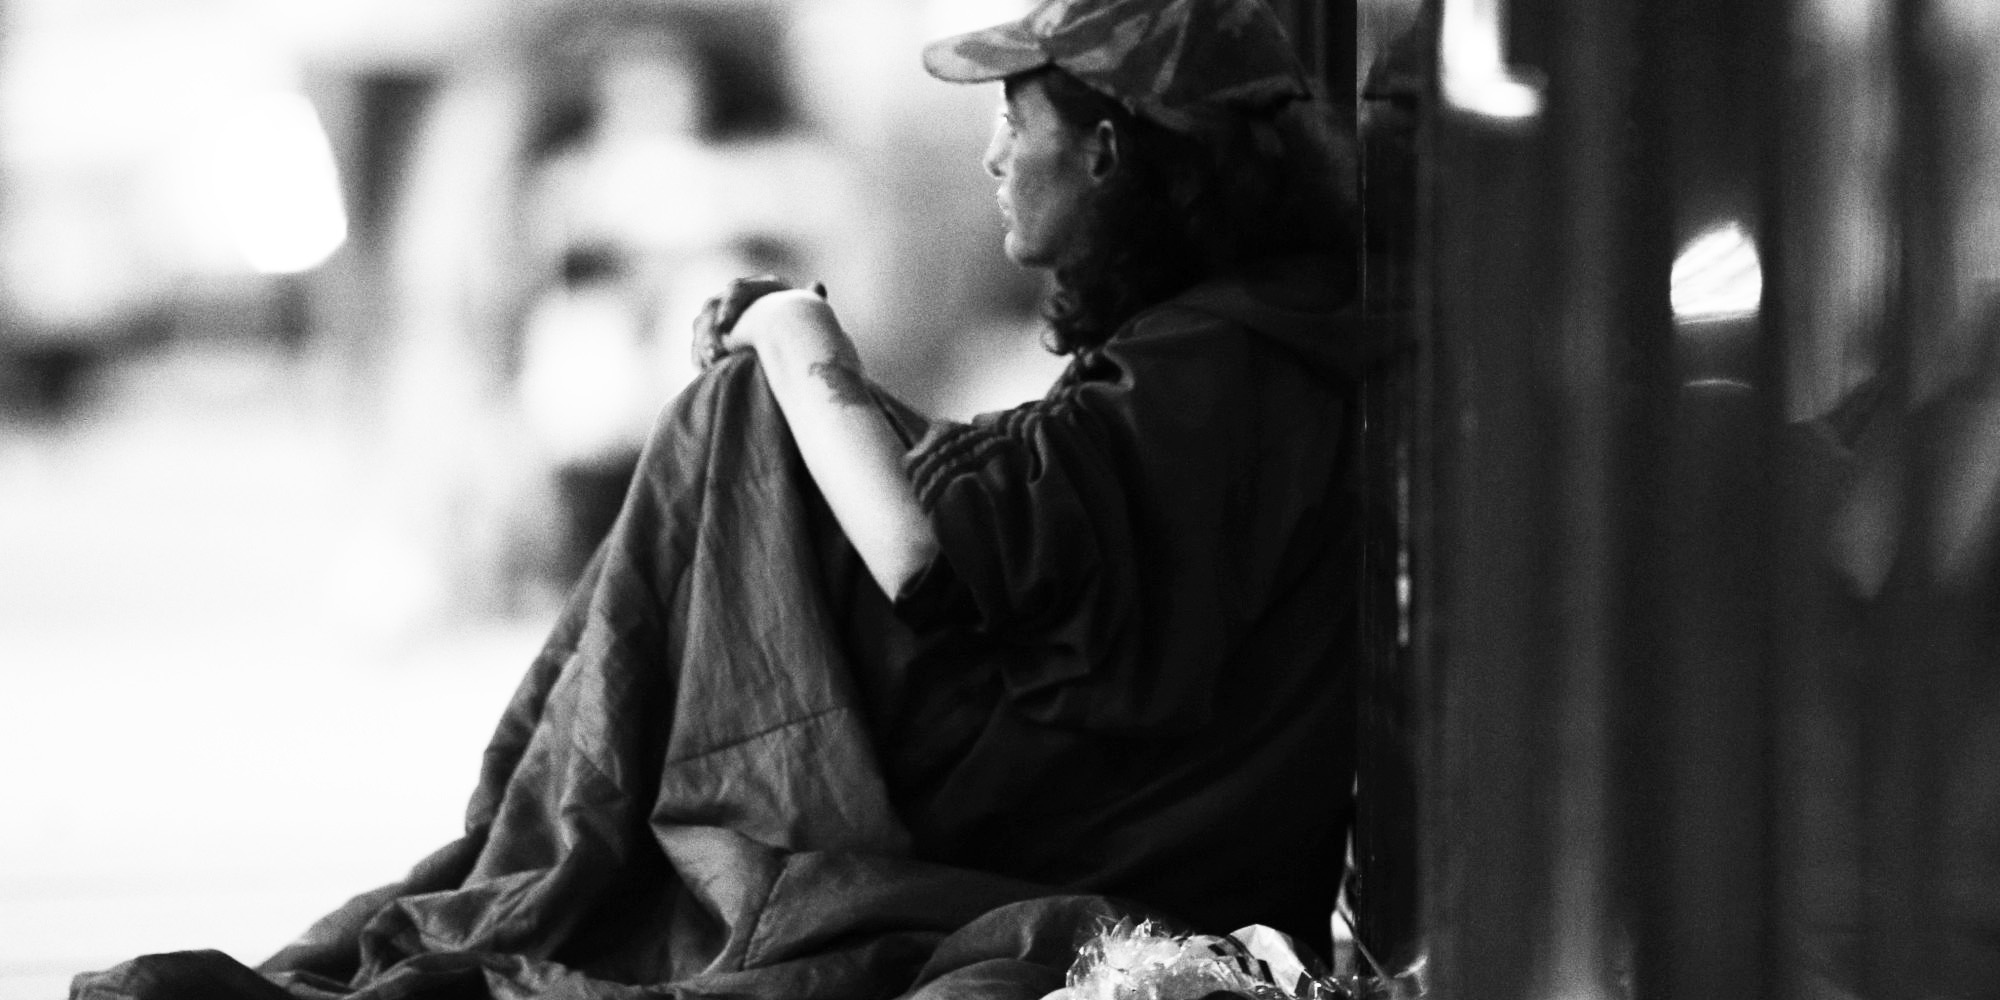 A woman who is homeless sitting on the sidewalk.